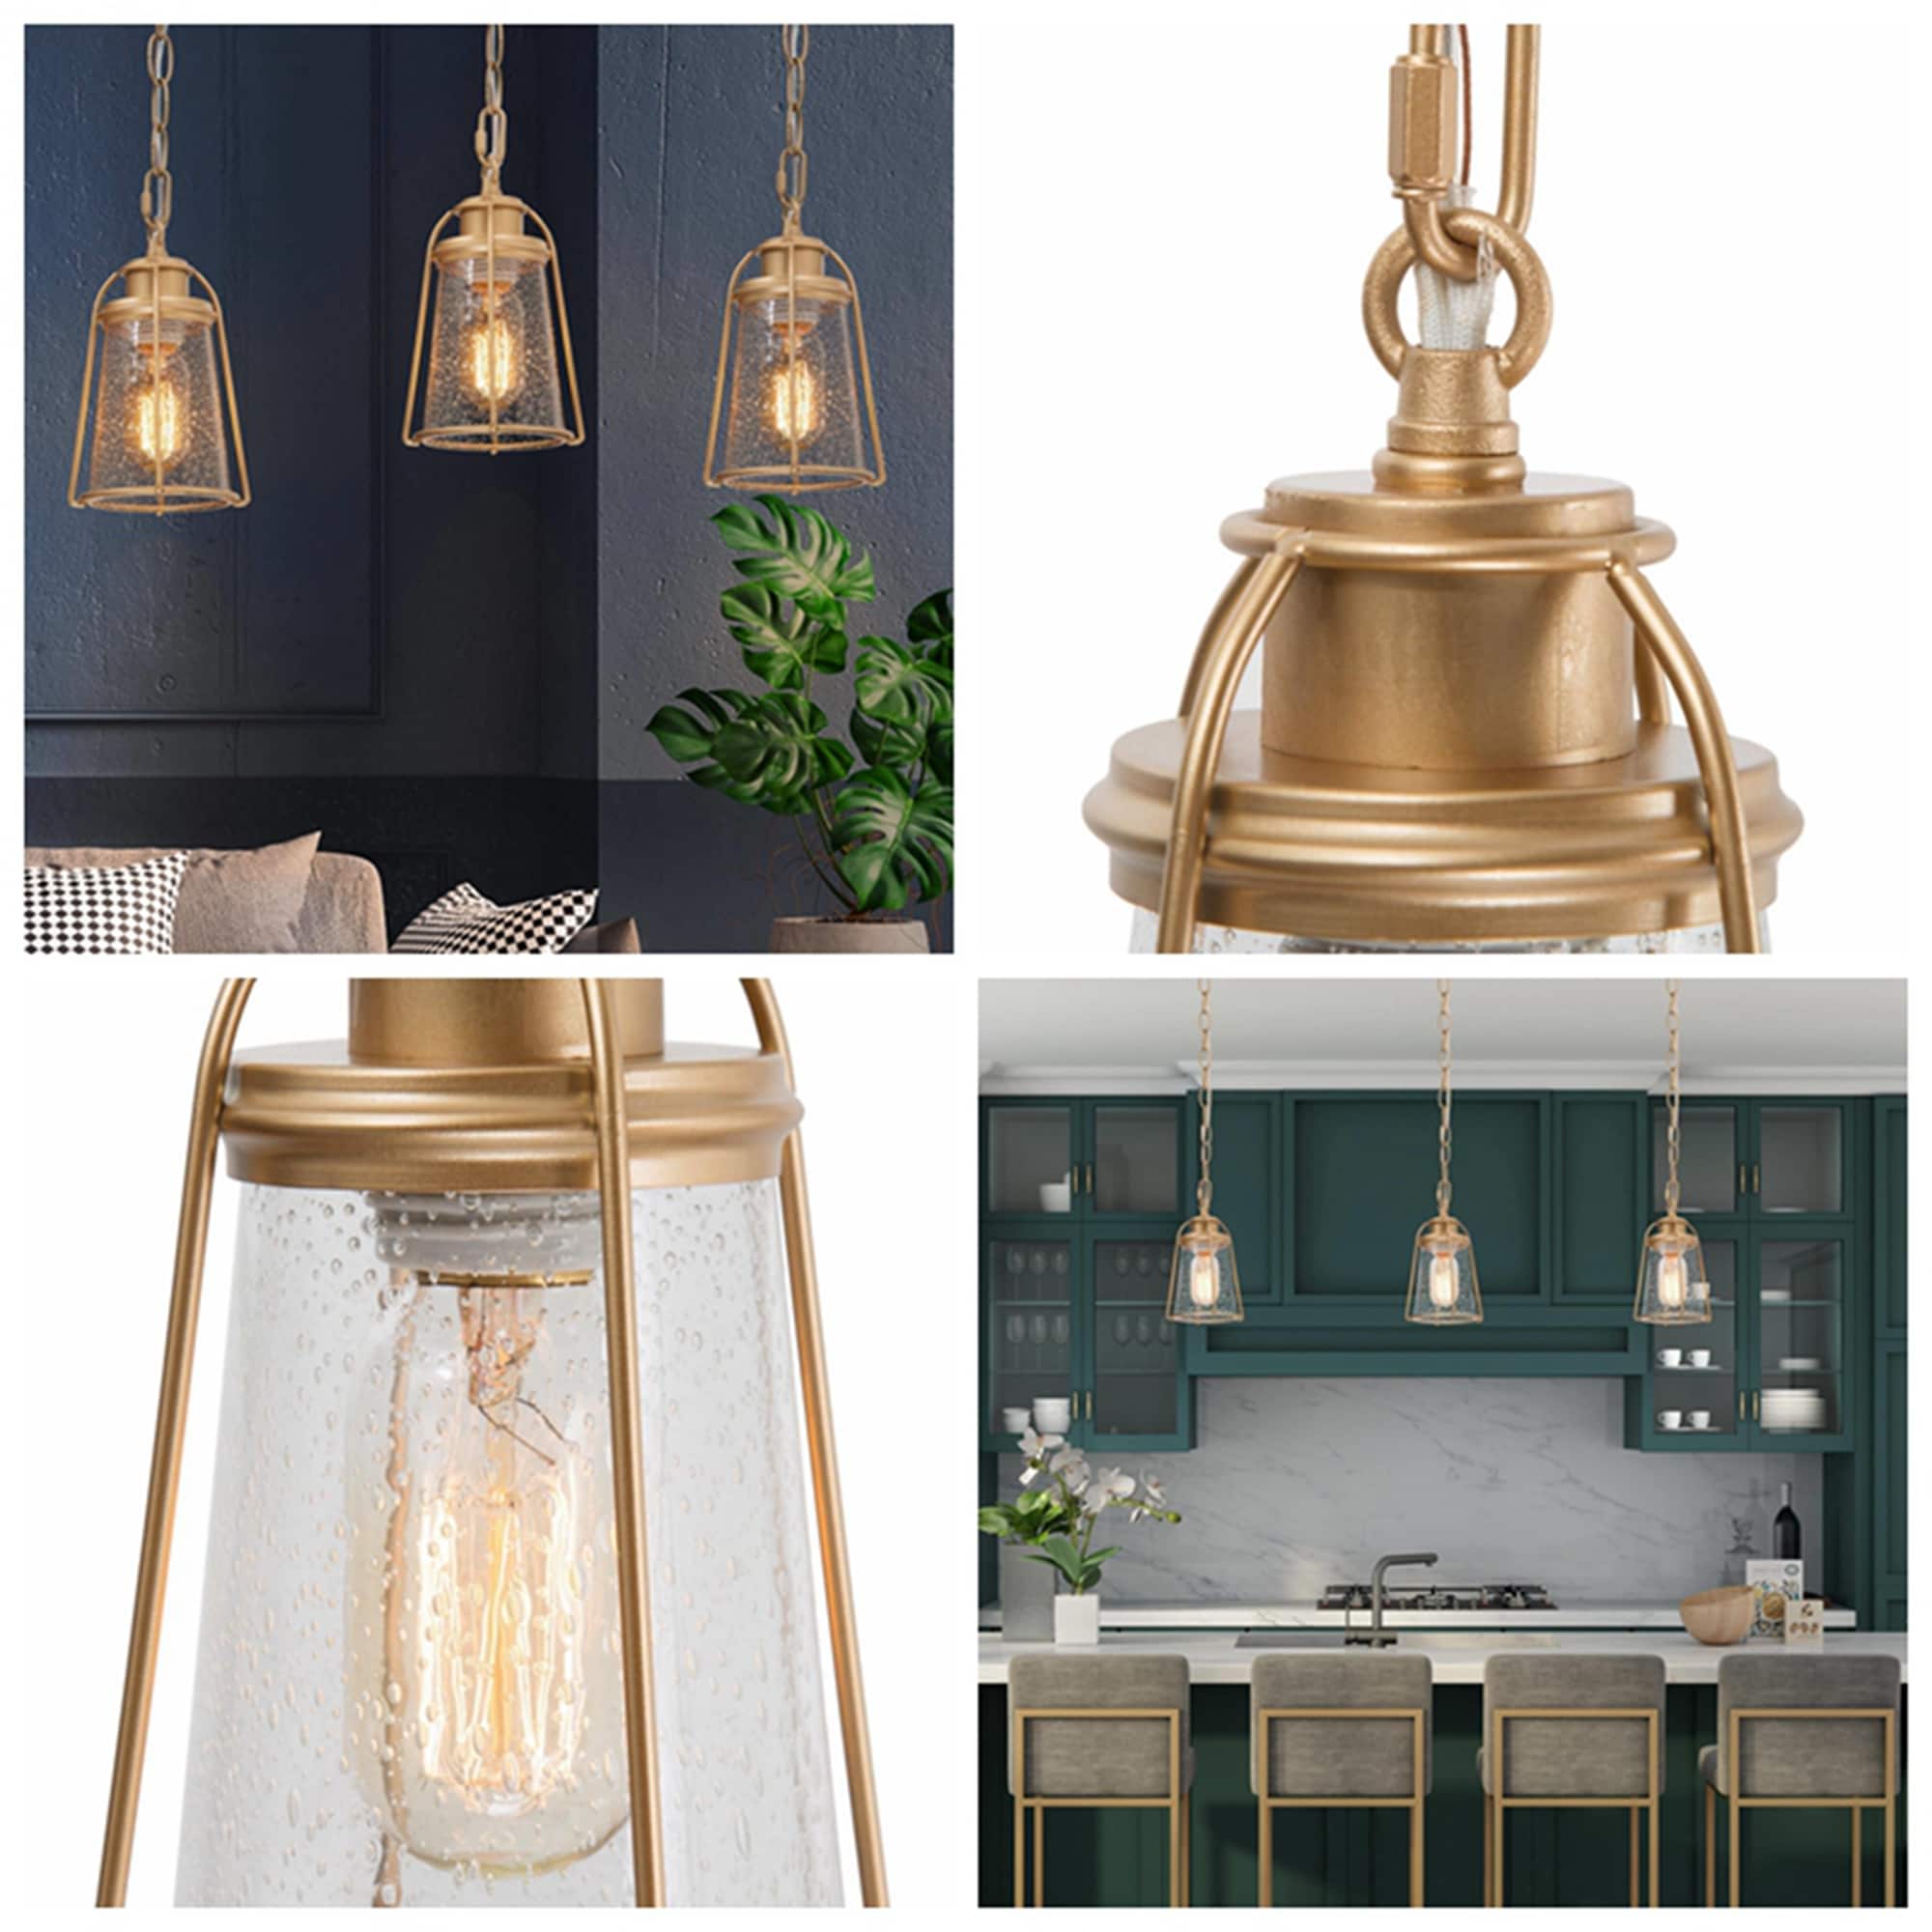 Seeded Lighting Gold Seeded Glass the in Light department Matte LED Pendant Uolfin Kitchen Modern/Contemporary Glass at Lantern and Hanging Mini Shade Island